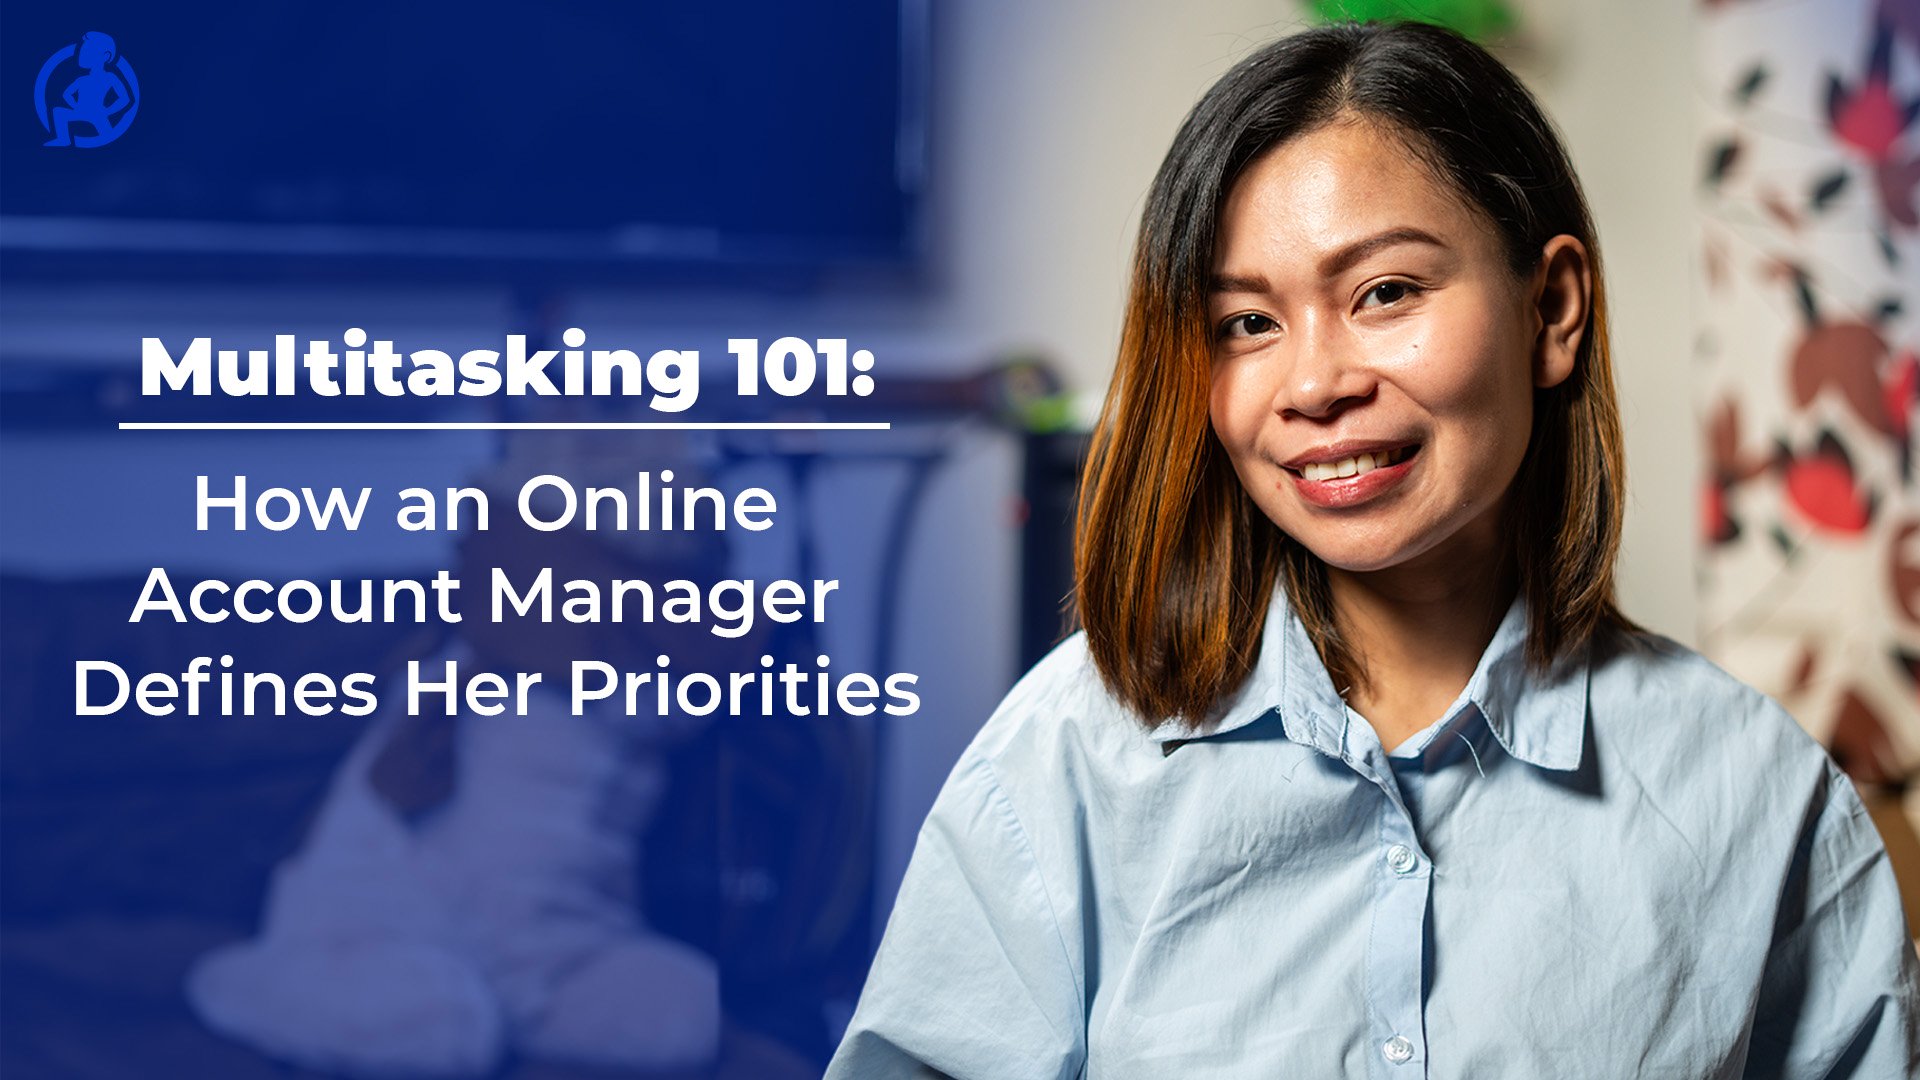 Multitasking 101: How an Online Account Manager Defines Her Priorities